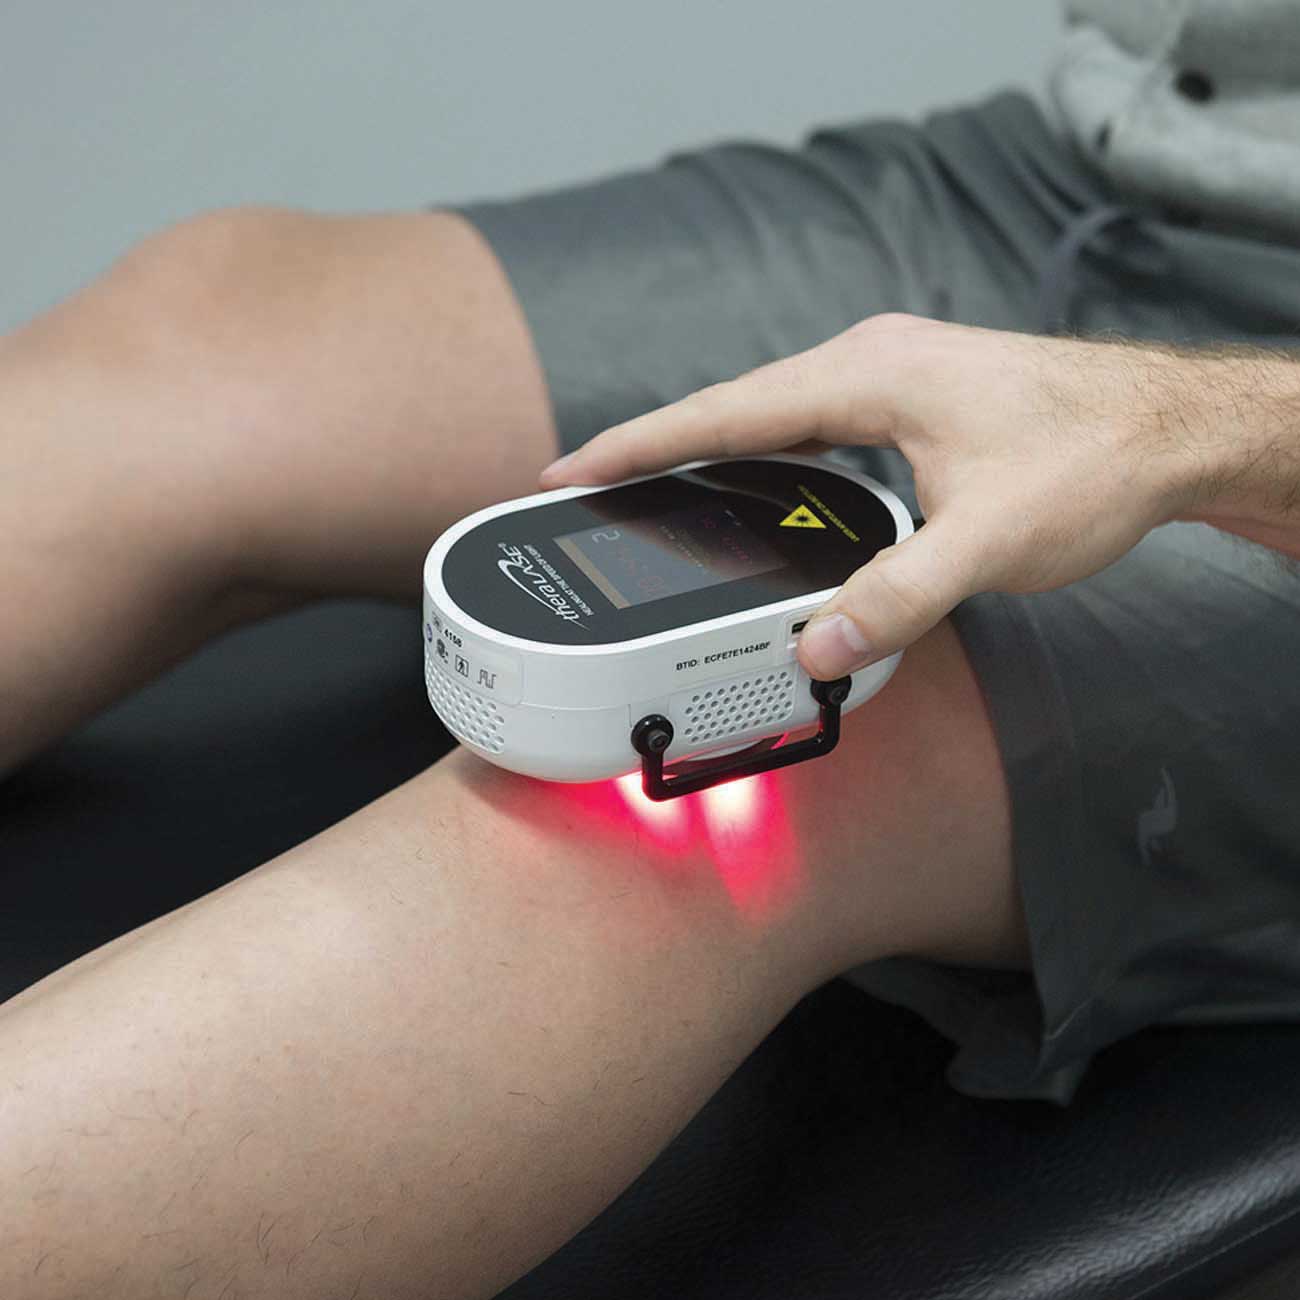 Reduce inflammation. Accelerate tissue healing. Our Theralase® CLT Cool Laser Therapy can help.